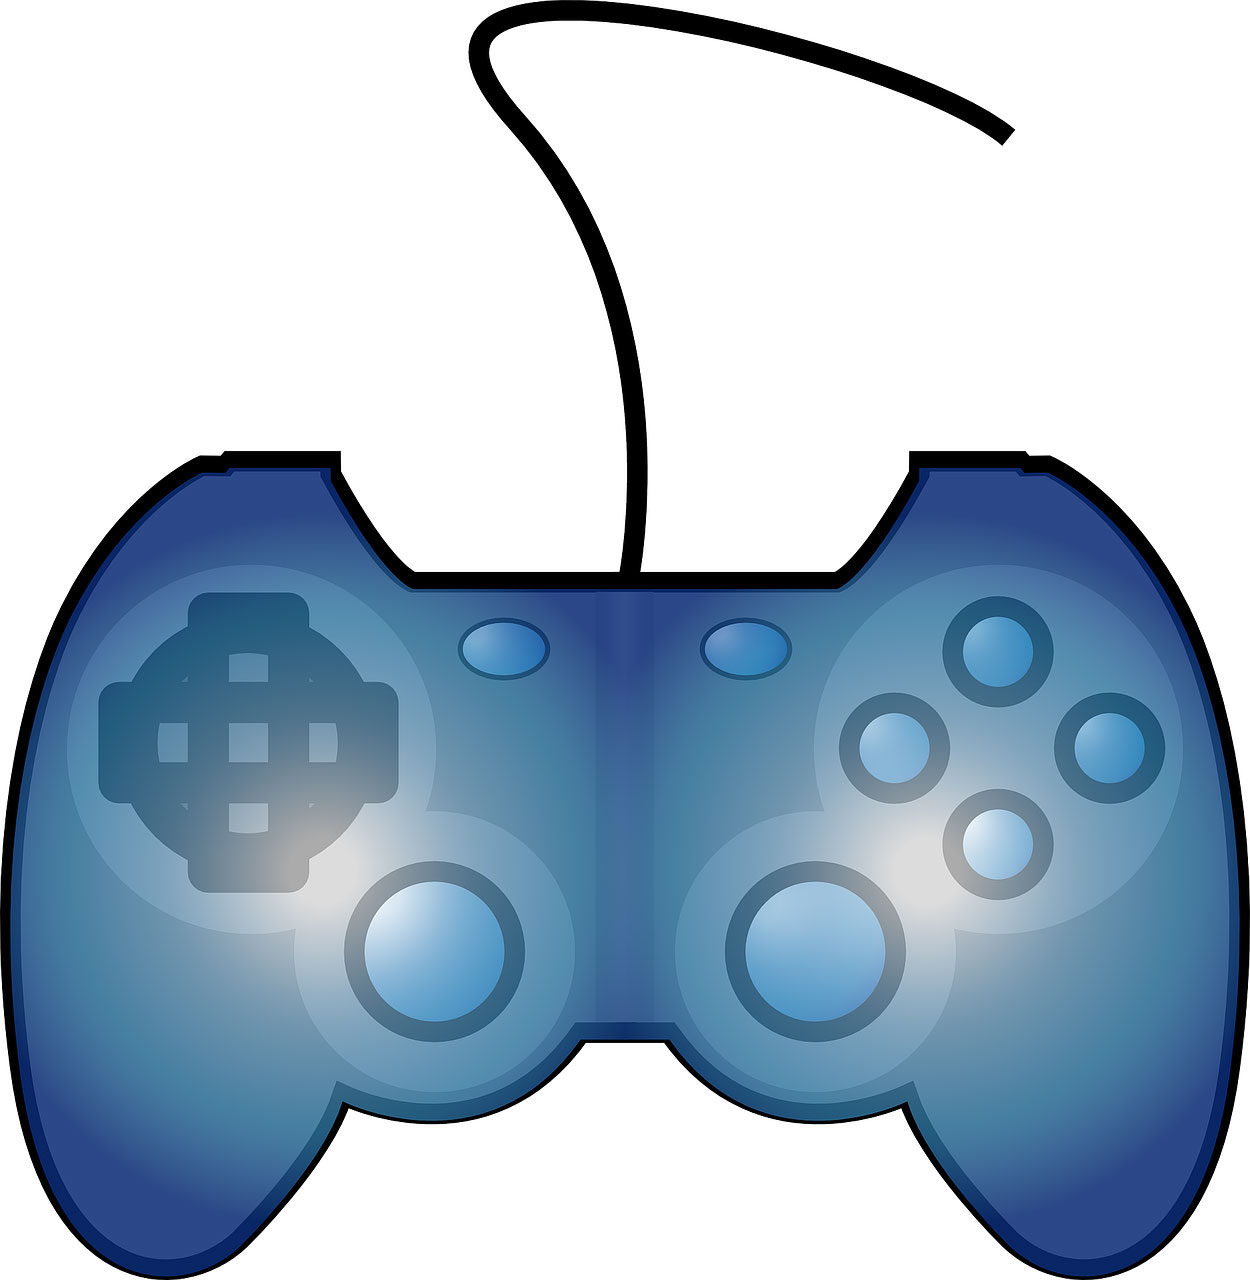 Sector Image (Games Industry: Joypad, game controller)